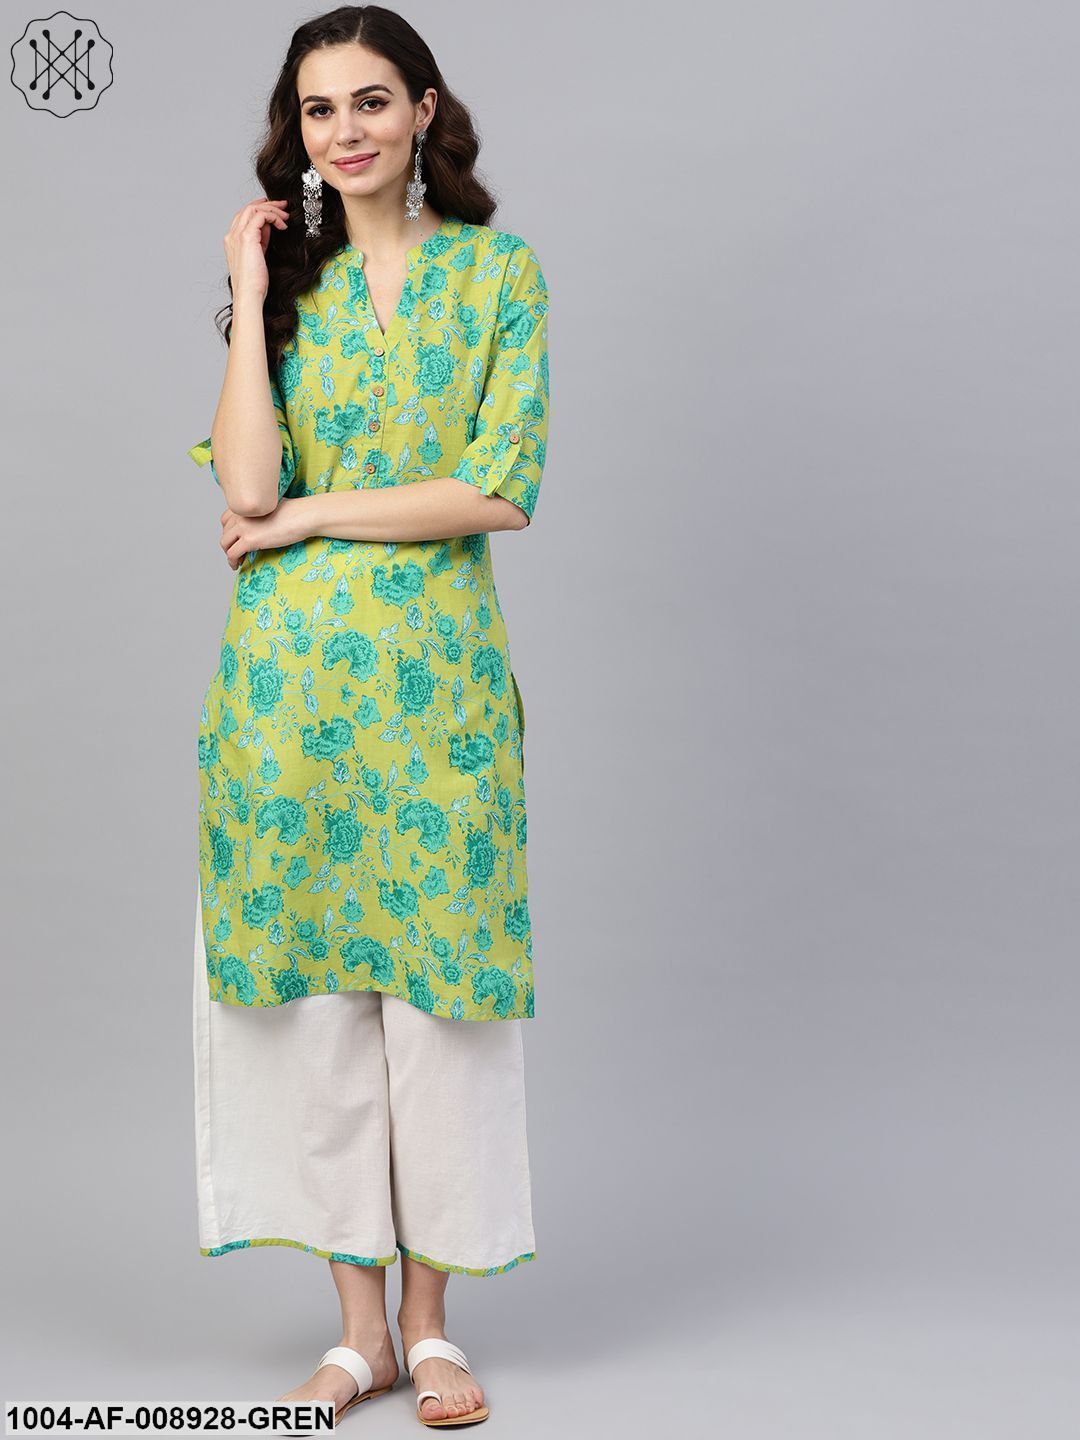 Fluorescent Green & Blue Floral Printed Kurta Set With White Palazzo With Print Detailing